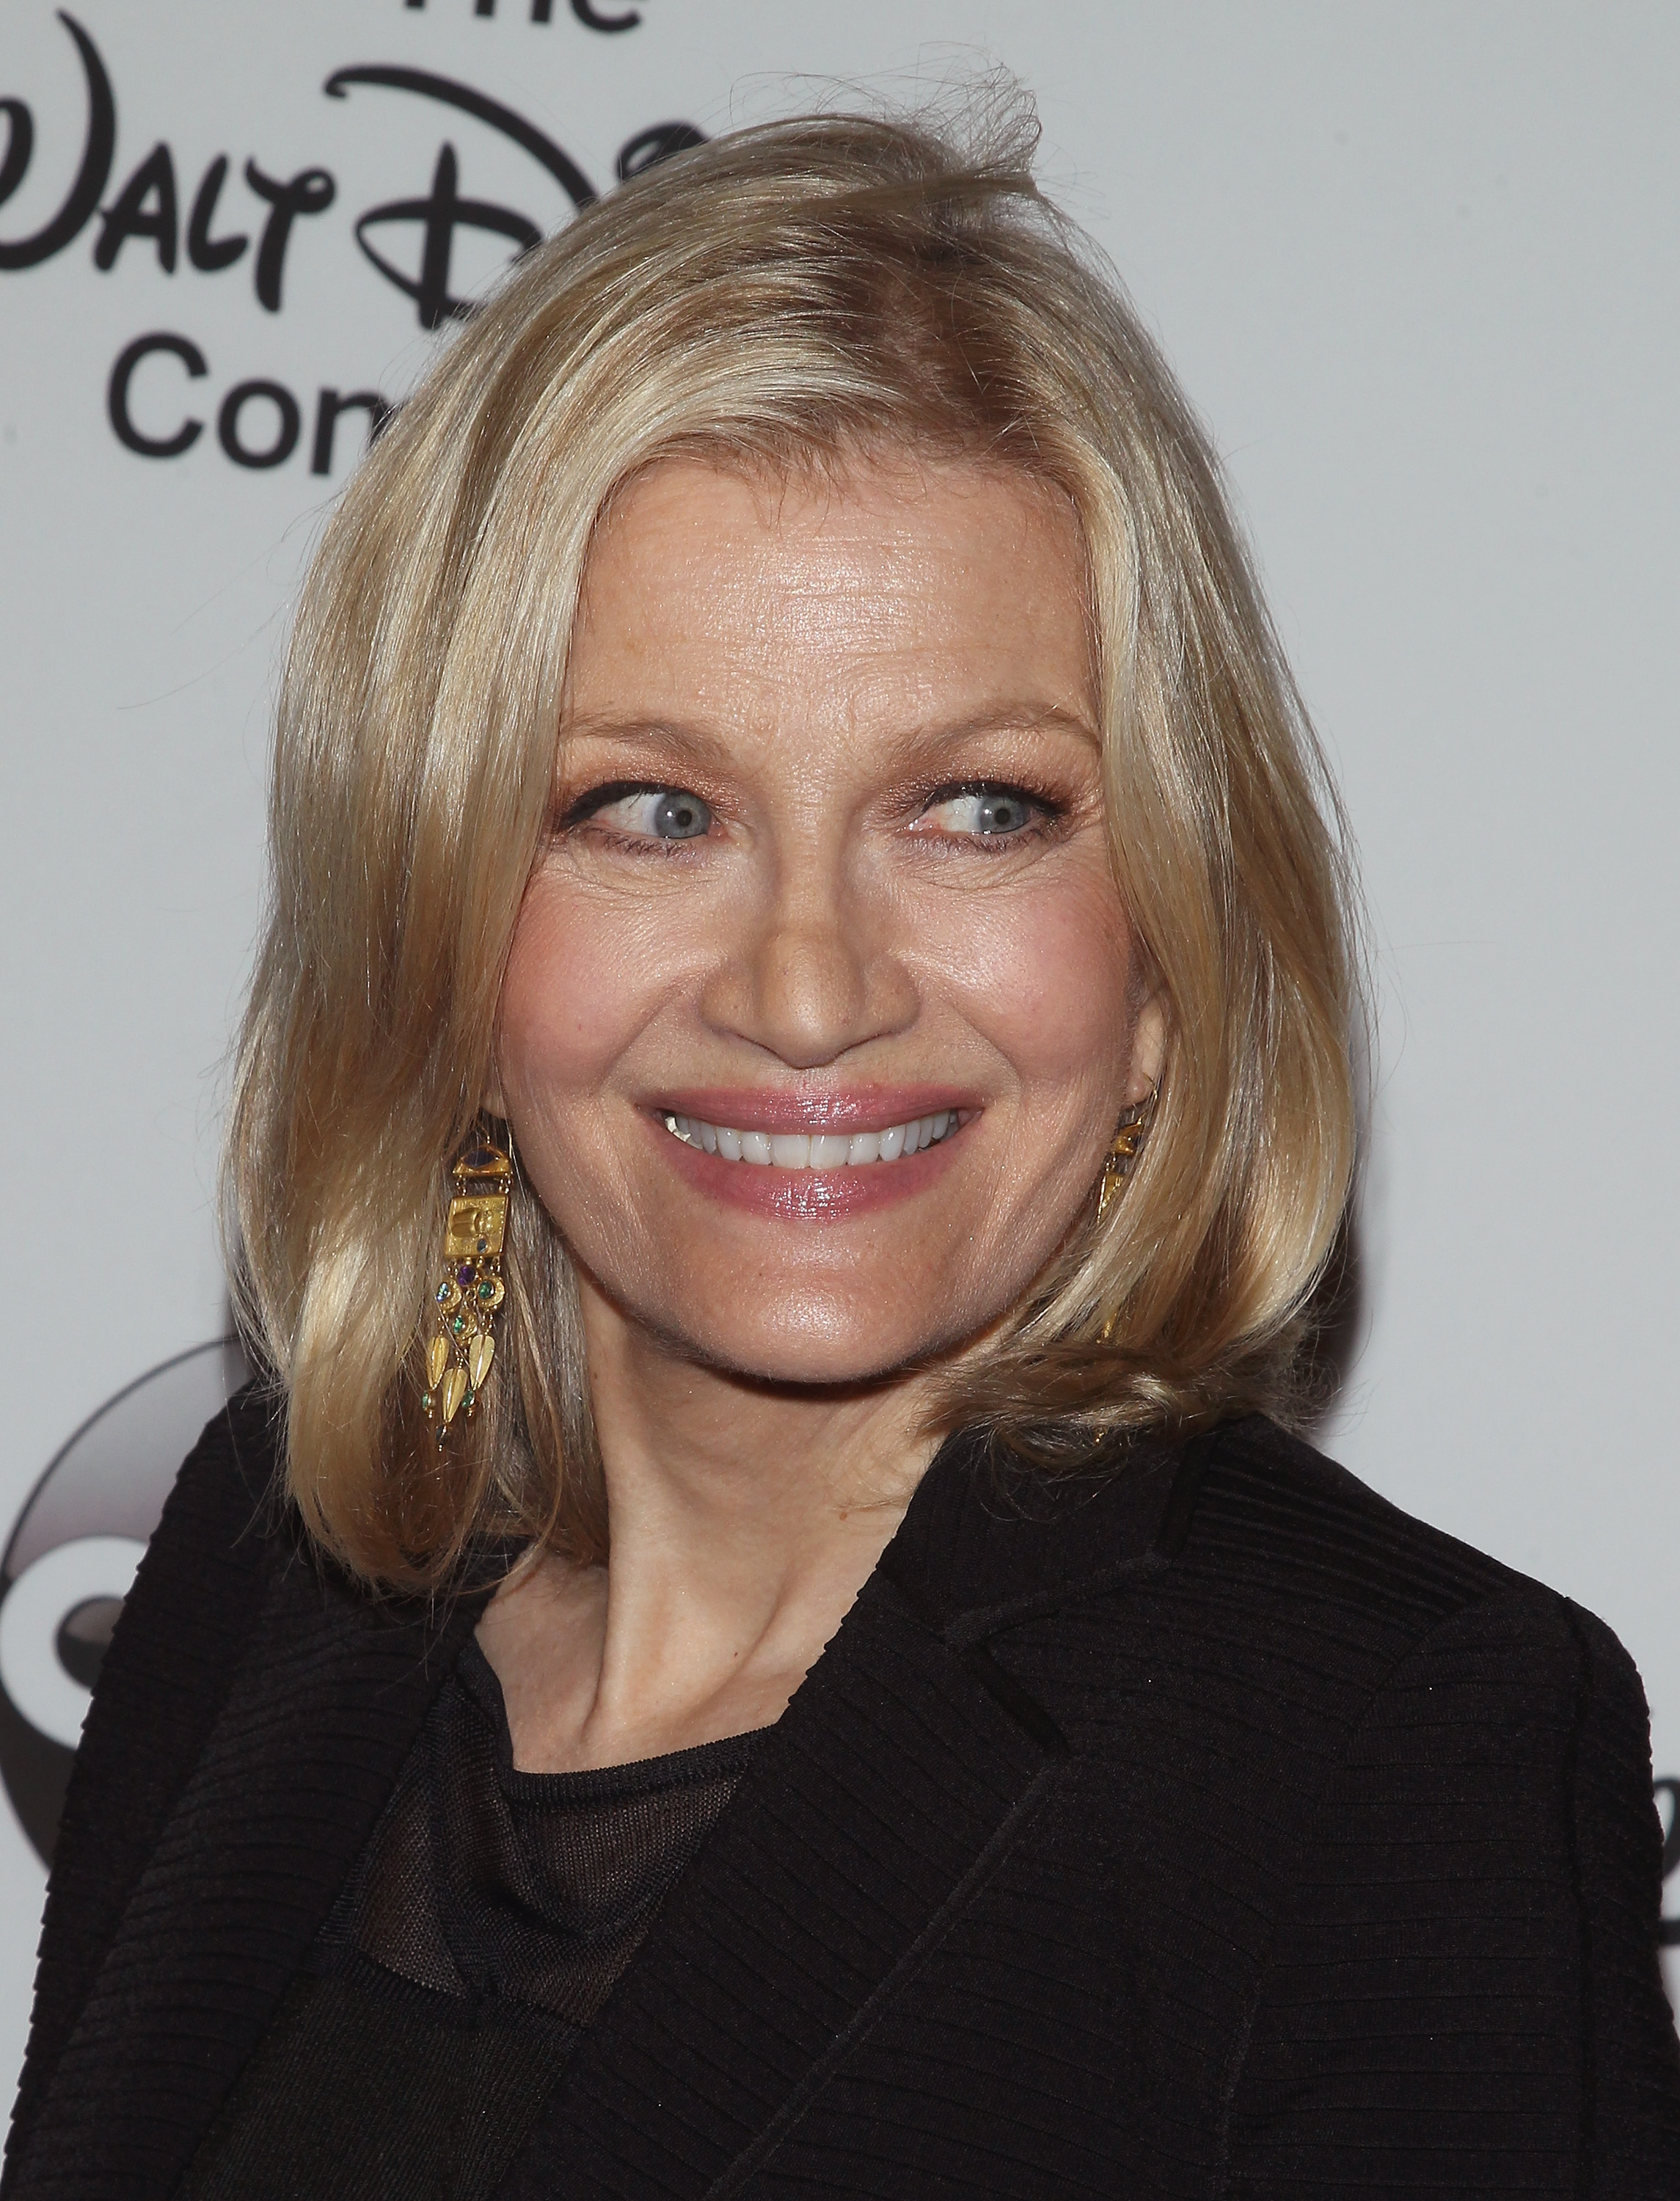 Diane Sawyer  attends A Celebration of Barbara Walters Cocktail Reception Red Carpet at the Four Seasons Restaurant on May 14, 2014 in New York.